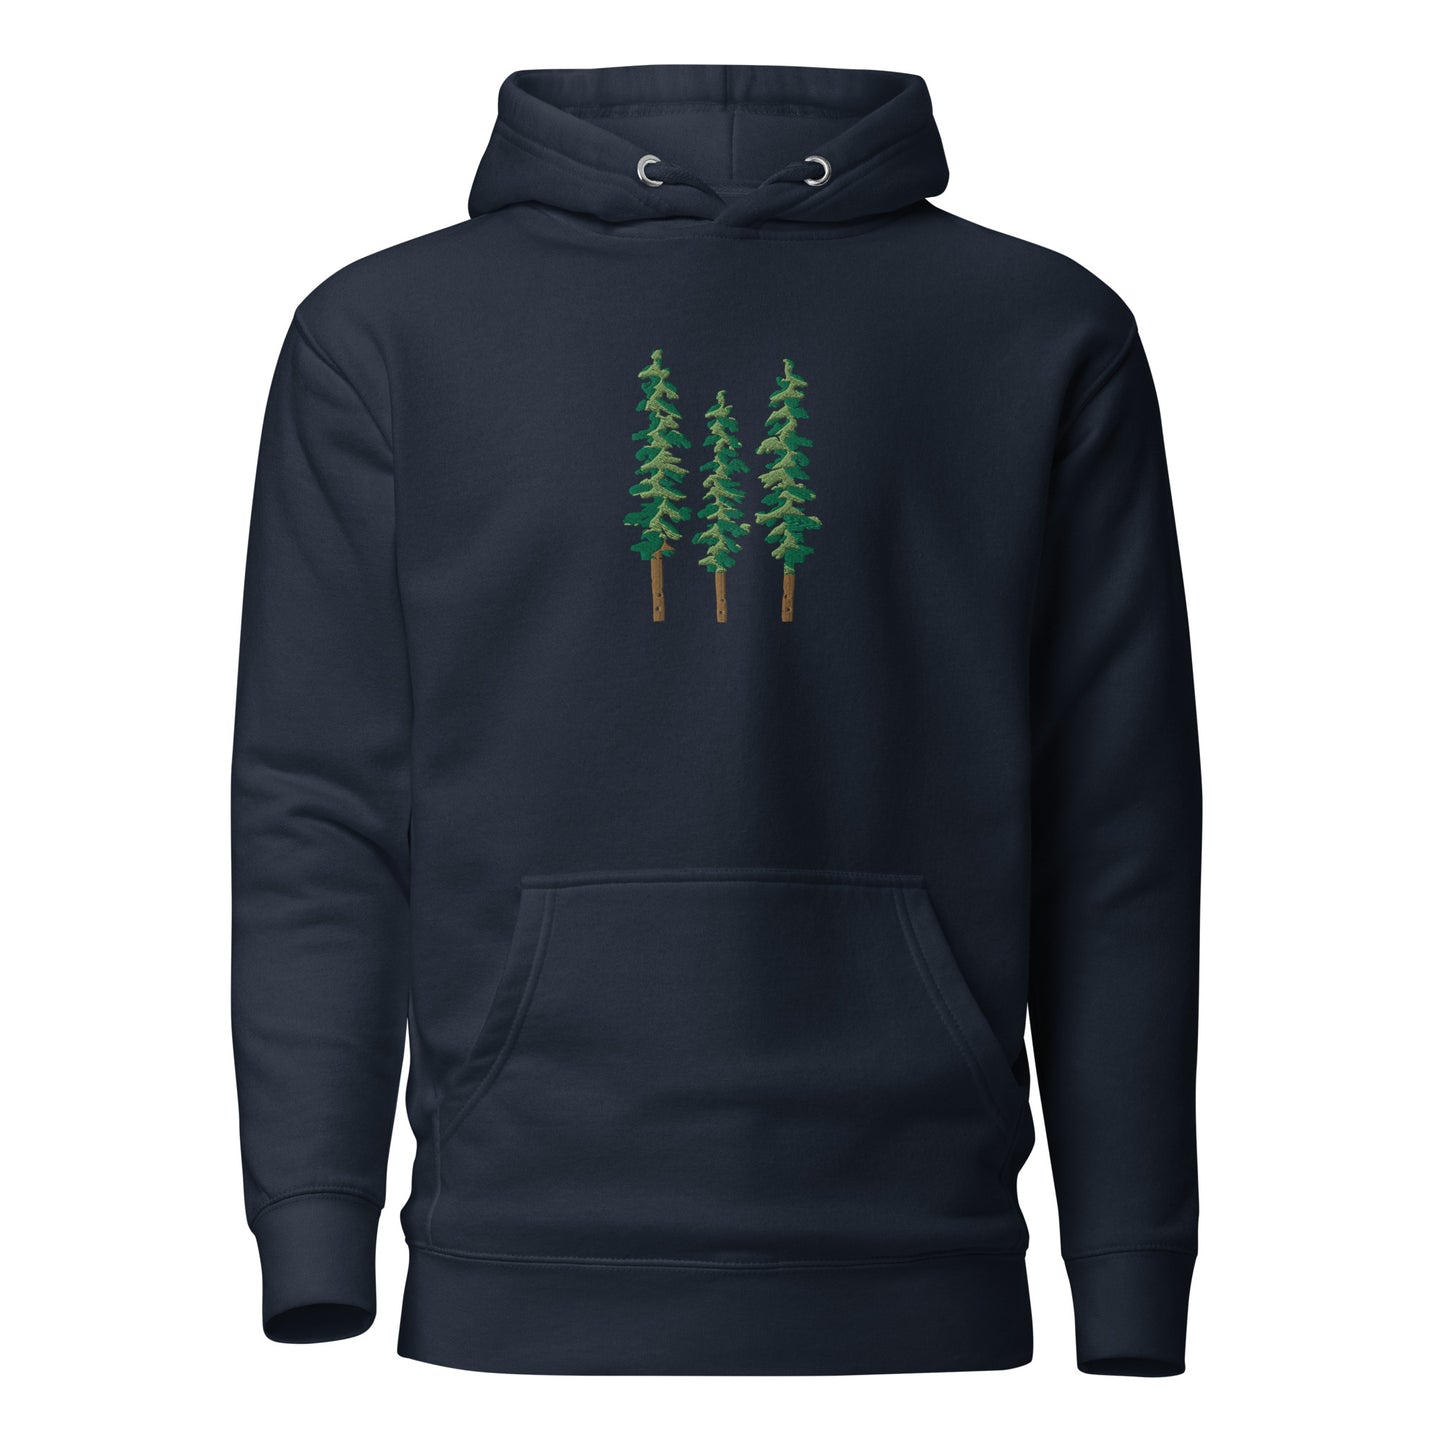 Lumina City Forest Embroidered Unisex Hoodie